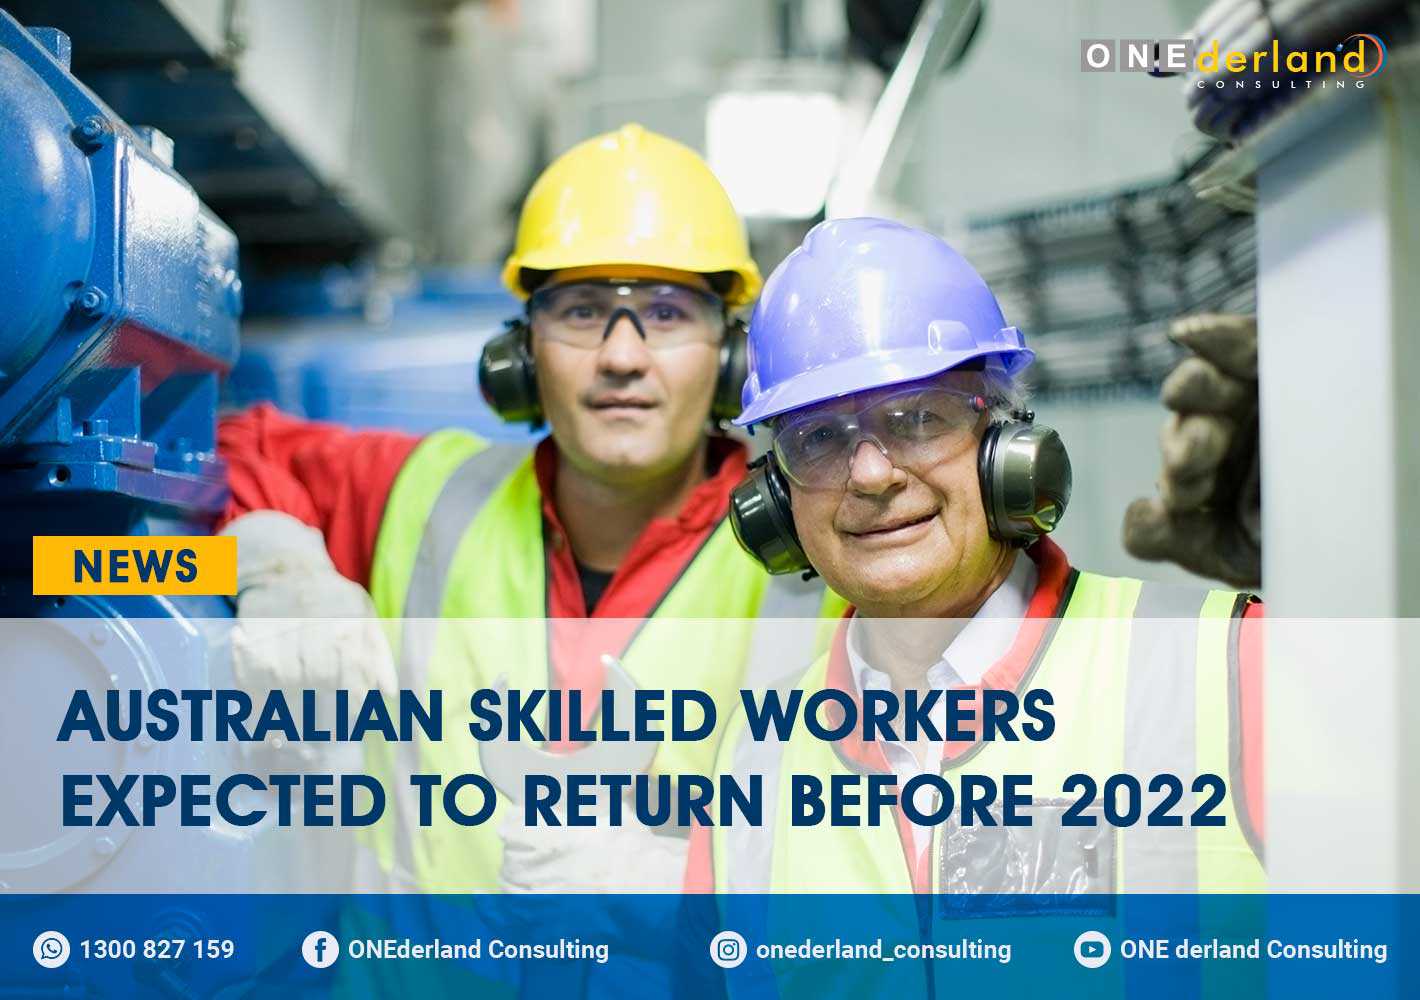 Australian Skilled Workers Expected to Return Before 2022